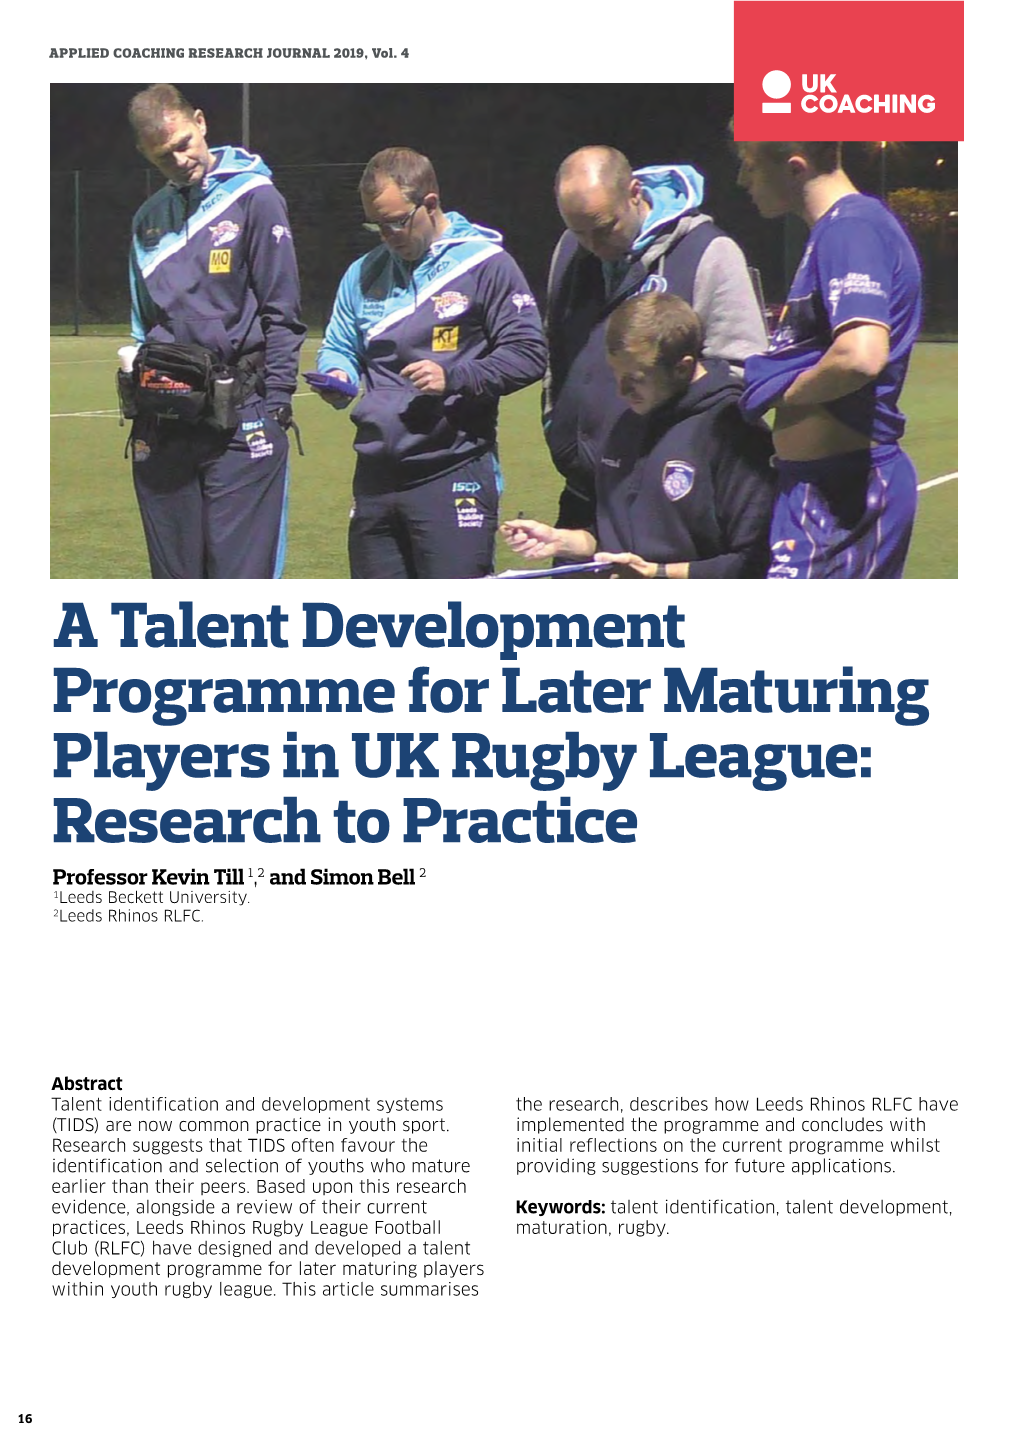 A Talent Development Programme for Later Maturing Players in UK Rugby League: Research to Practice Professor Kevin Till 1,2 and Simon Bell 2 1Leeds Beckett University